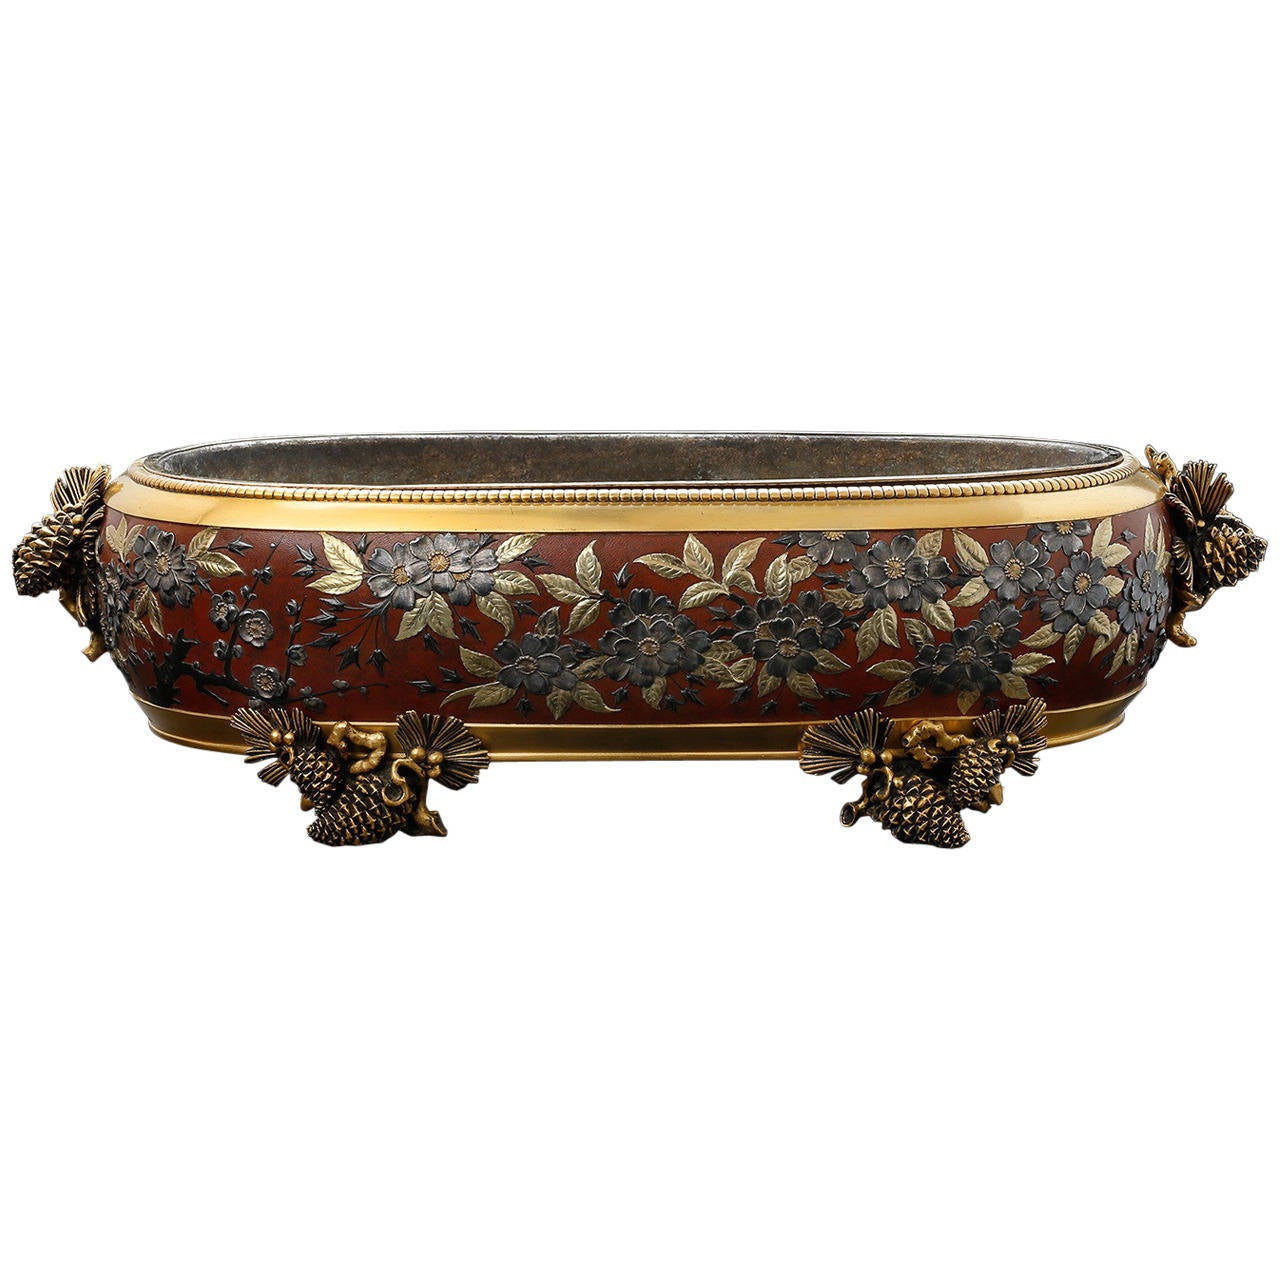 Exceptional Centerpiece by Émile Reiber, for the Firm of Christofle et Cie For Sale